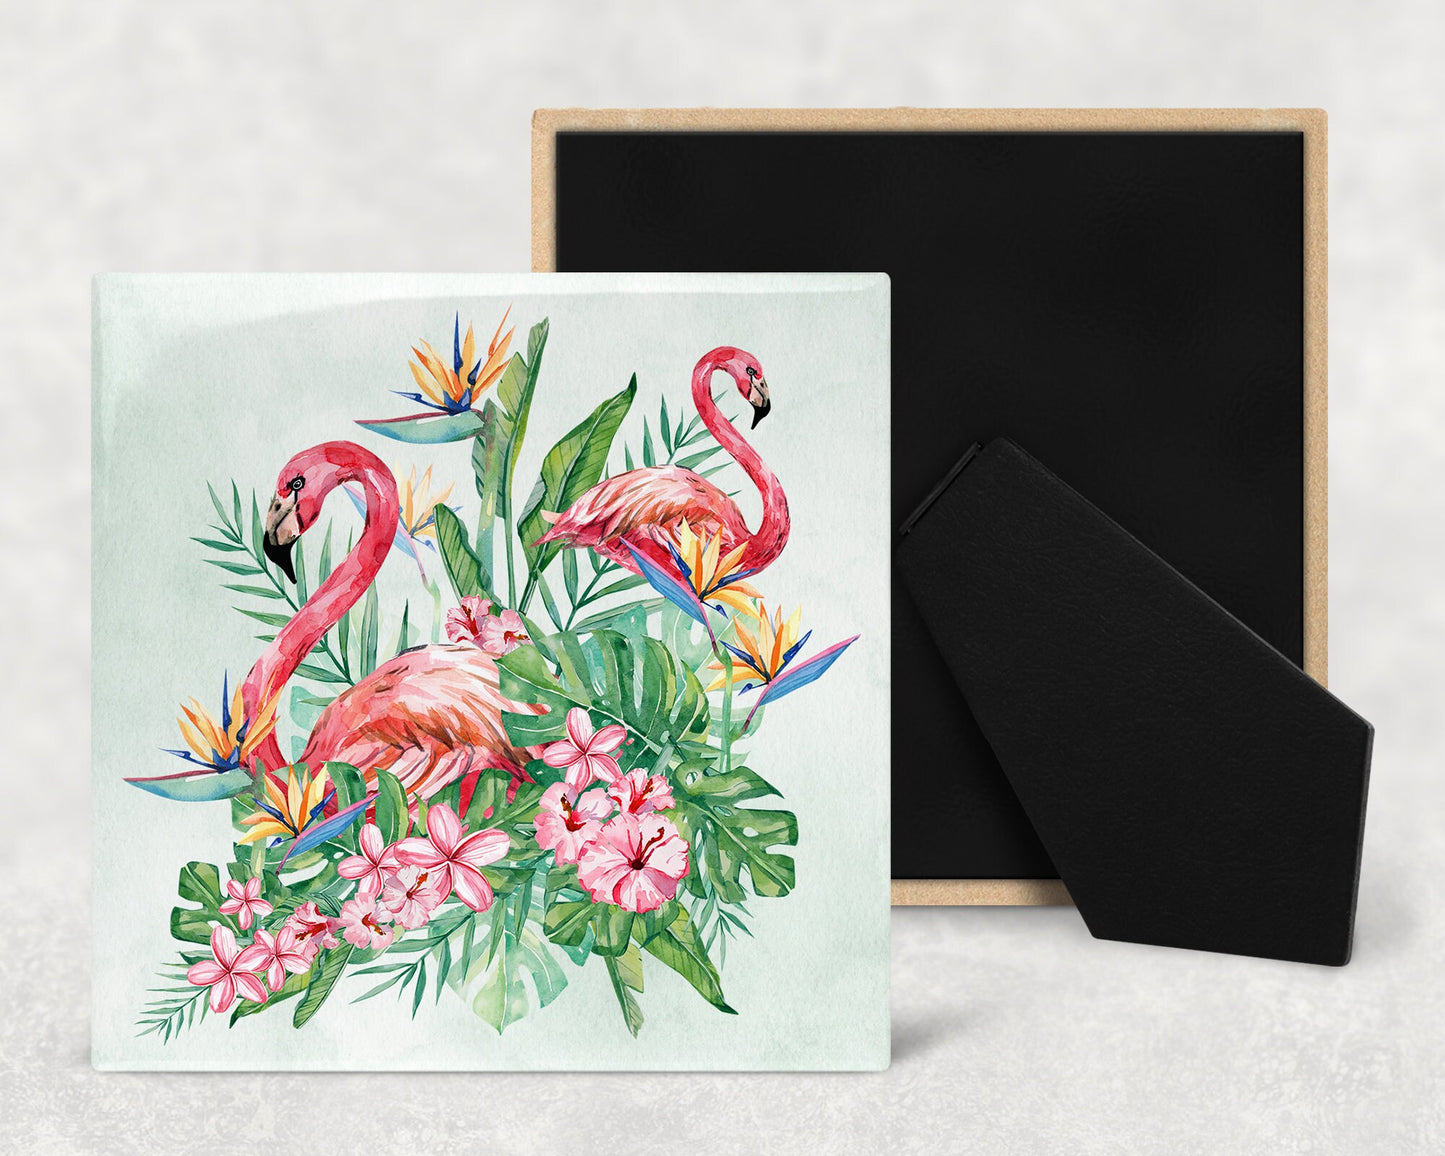 Flamingos and Tropical Flowers Art Decorative Ceramic Tile with Optional Easel Back - Available in 3 Sizes